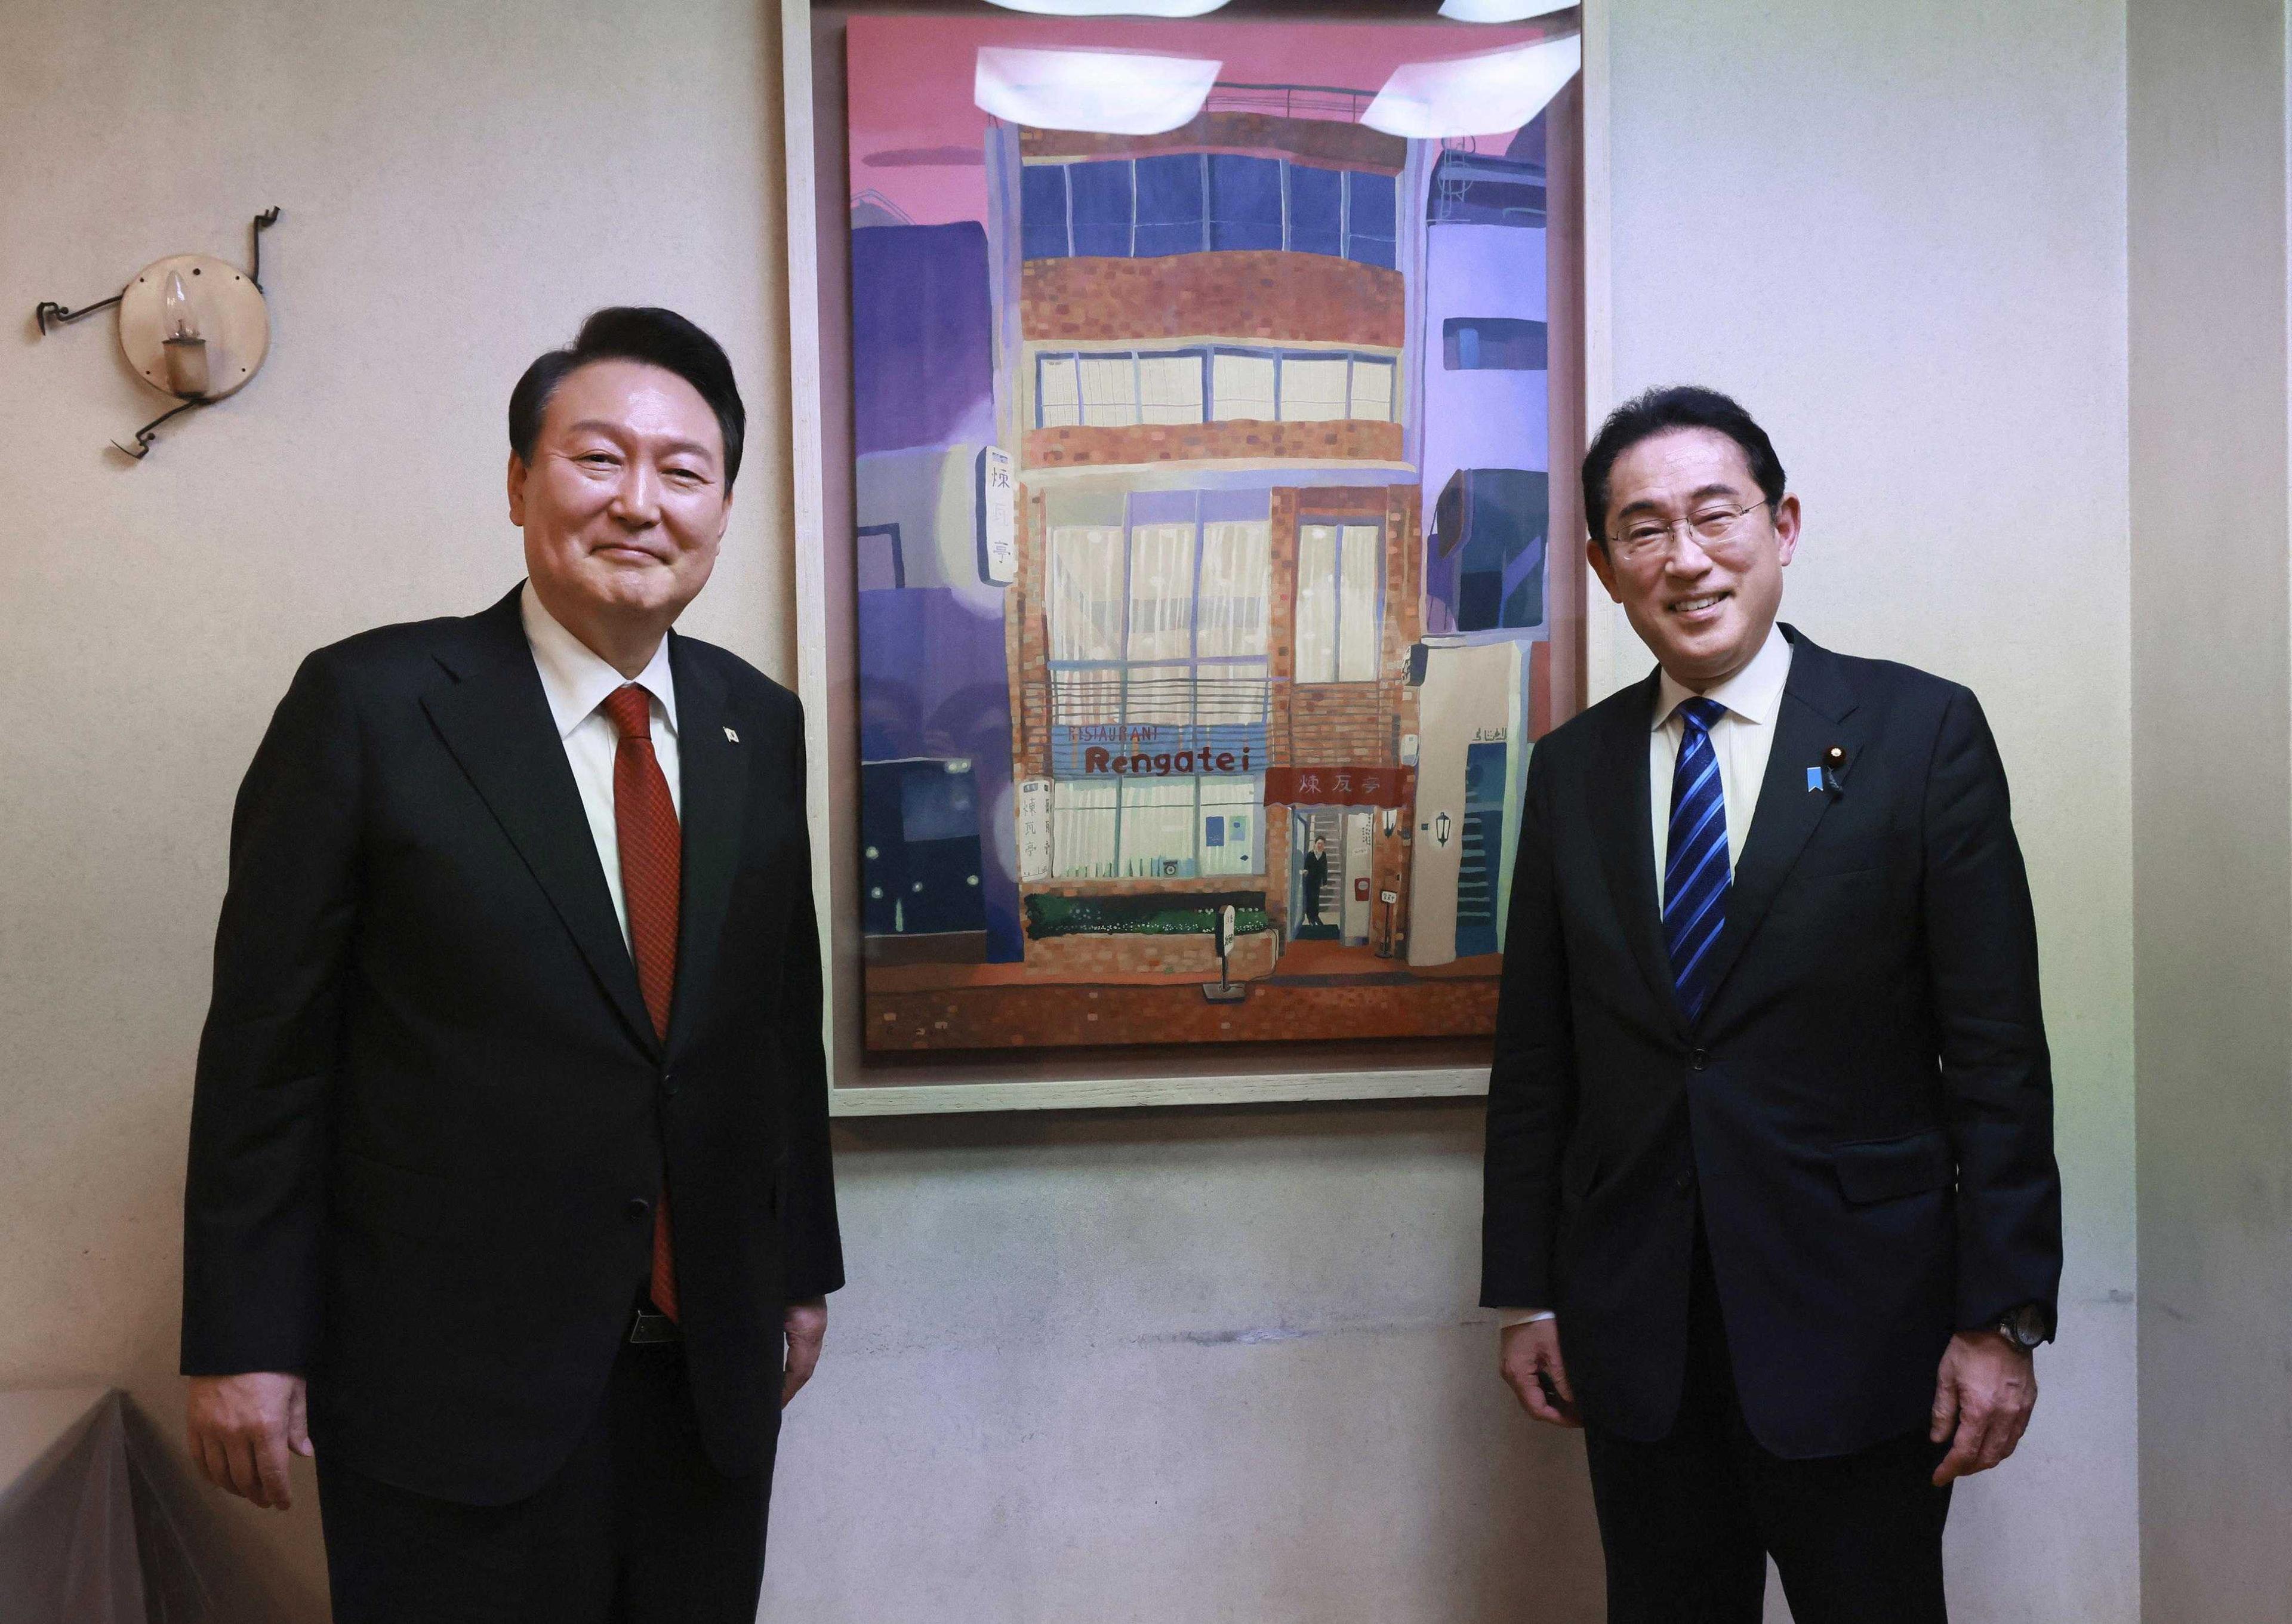 South Korea's President Yoon Suk-yeol poses for a photograph with Japan's Prime Minister Fumio Kishida at Ginza district in Tokyo, Japan March 16. Photo: Reuters